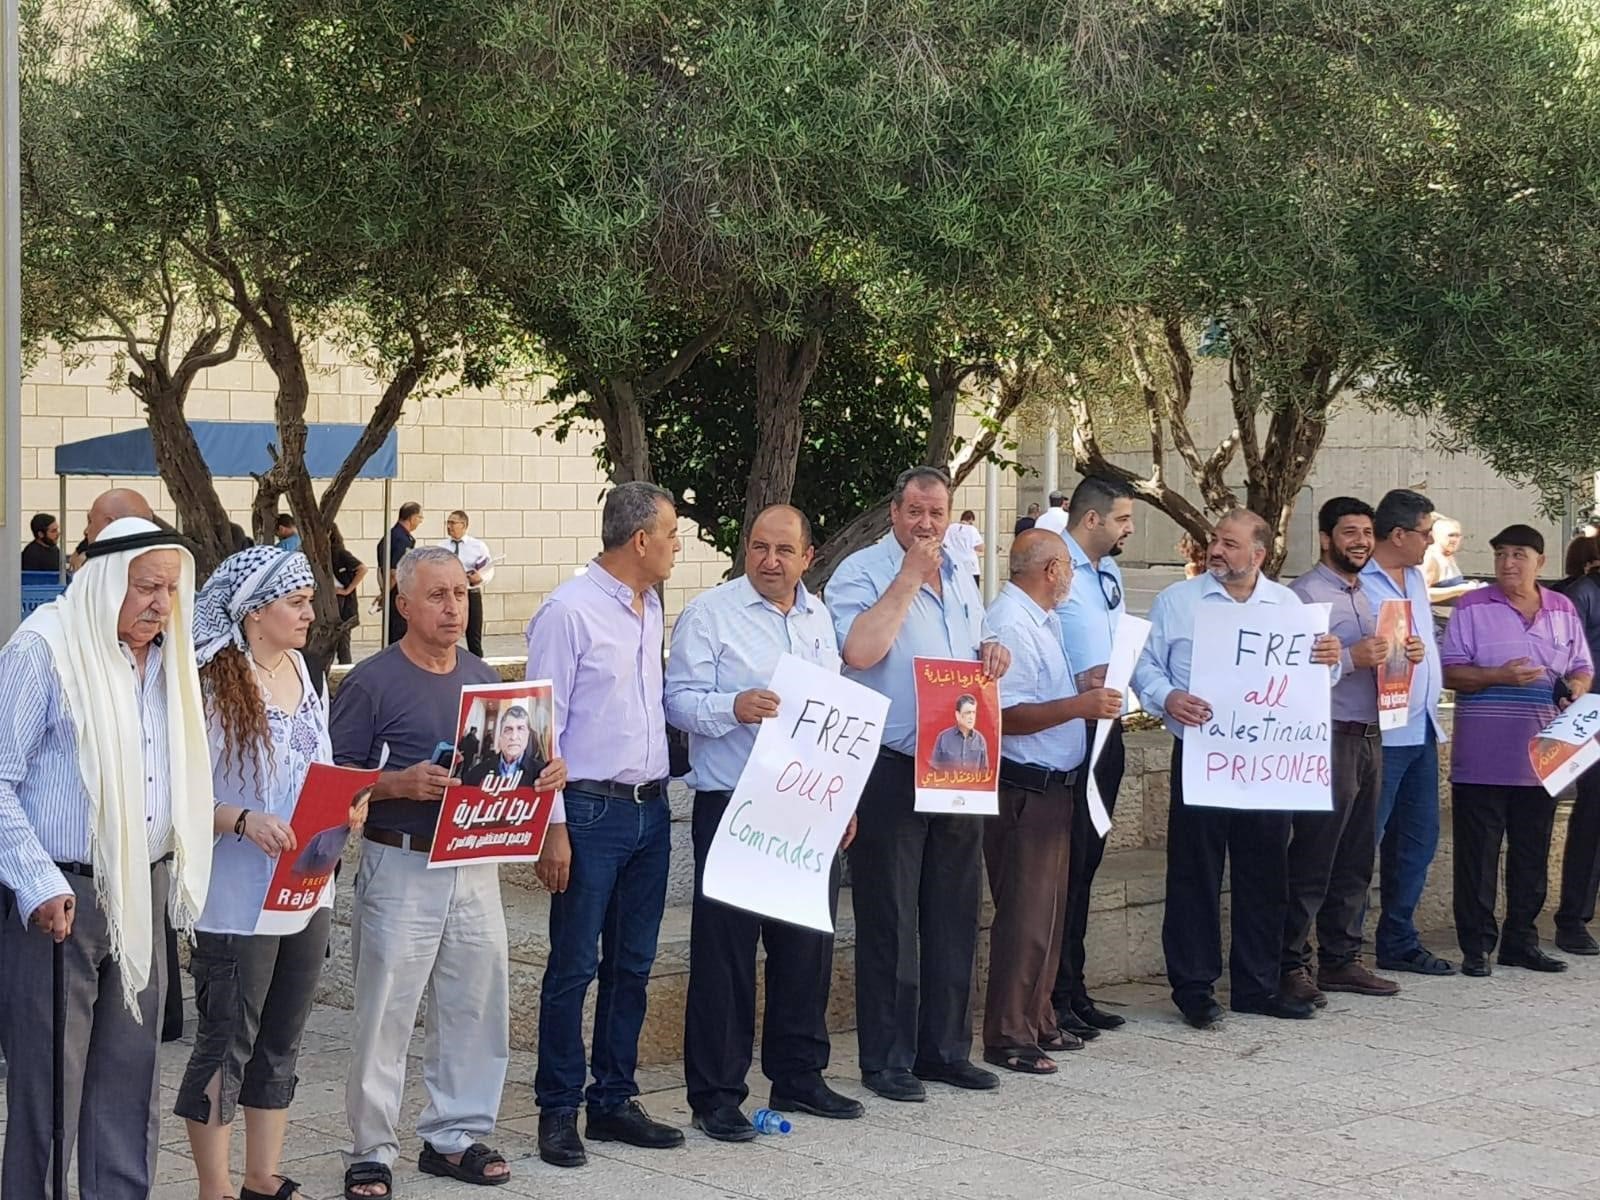 A demonstration against Raja’s detention outside Haifa Magistrate’s Court. United Arab List leader Mansour Abbas, on the right, holds a sign reading: “Free all Palestinian prisoners,” October 2, 2018. (Courtesy of Free Raja Eghbarieh Facebook page)